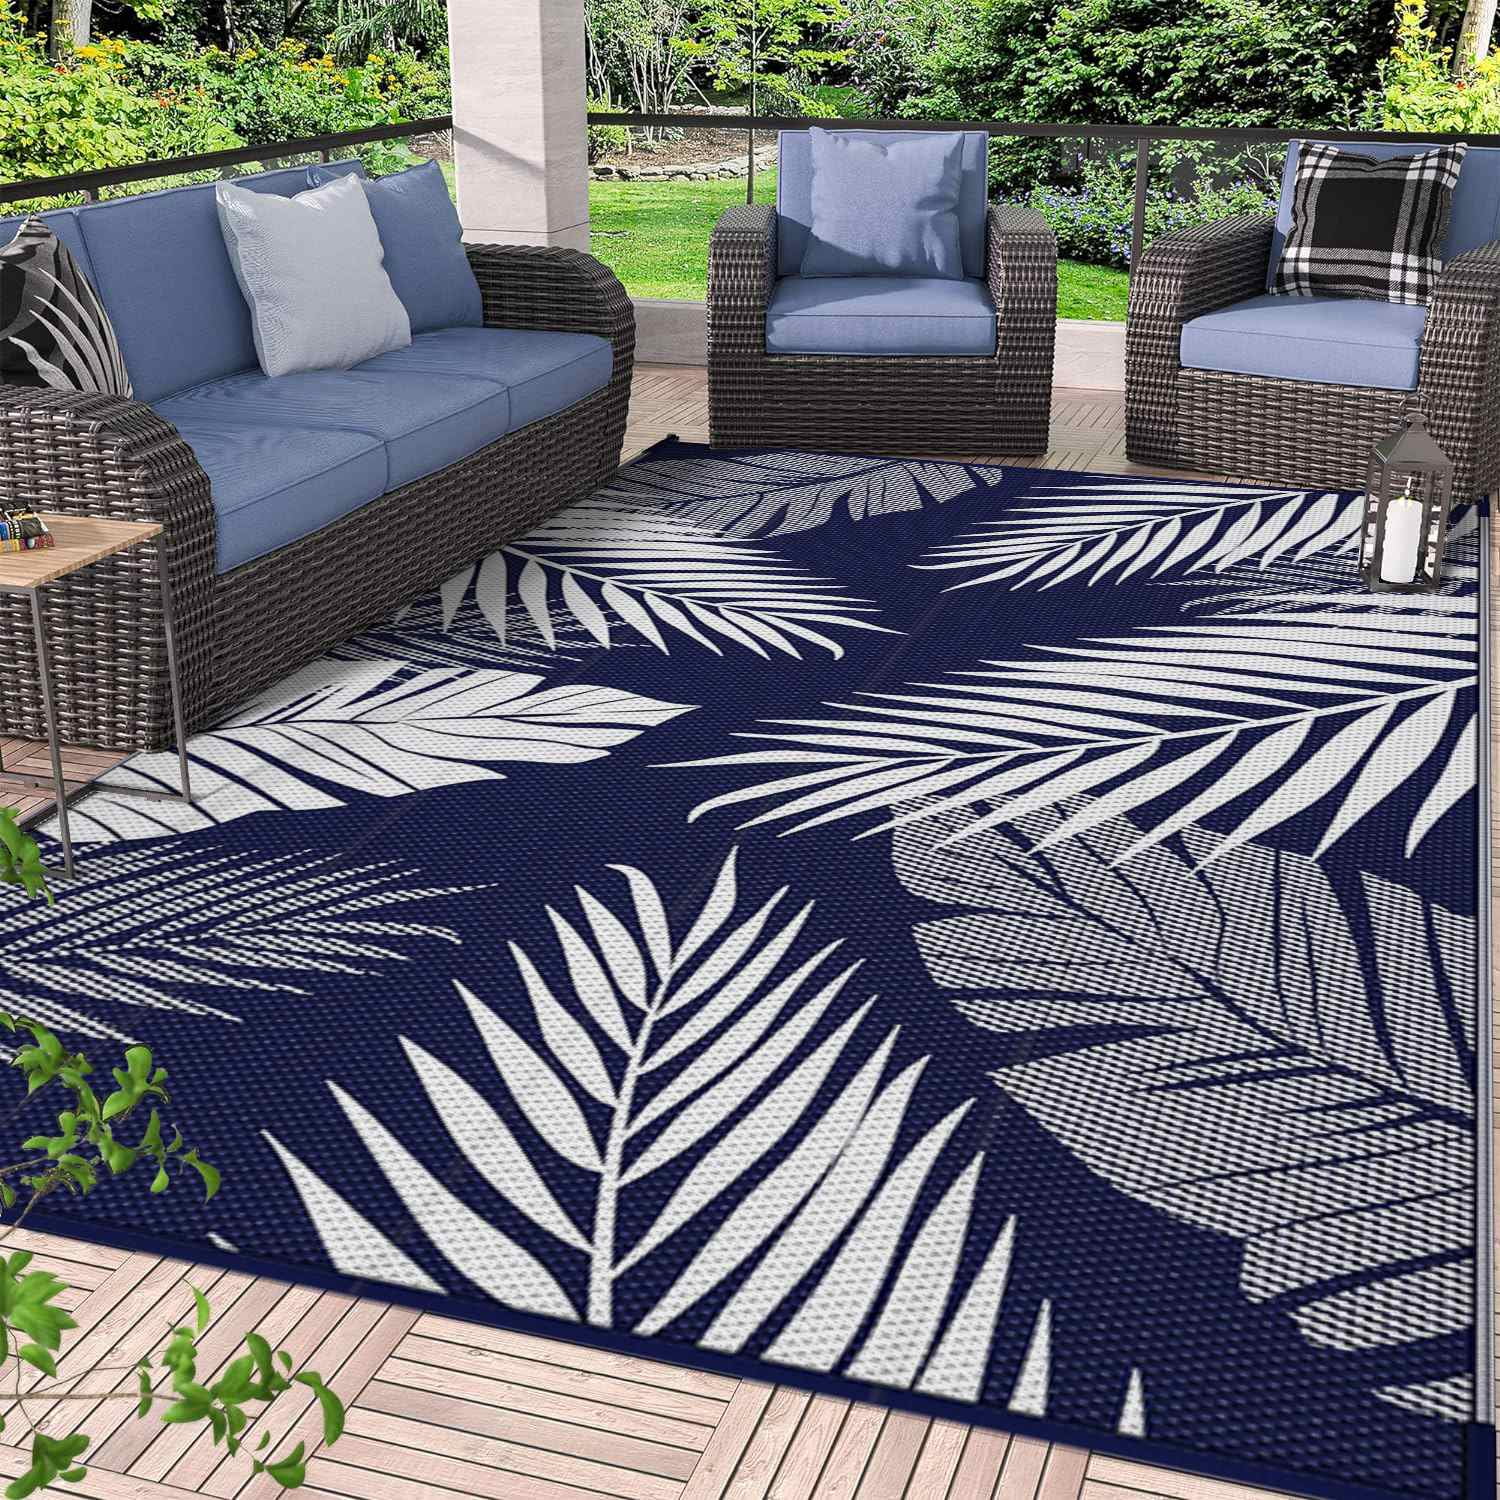 DEORAB 5'x8' Outdoor Rug for Patio Clearance,Reversible Straw Plastic  Waterproof Area Rugs,Blue & White